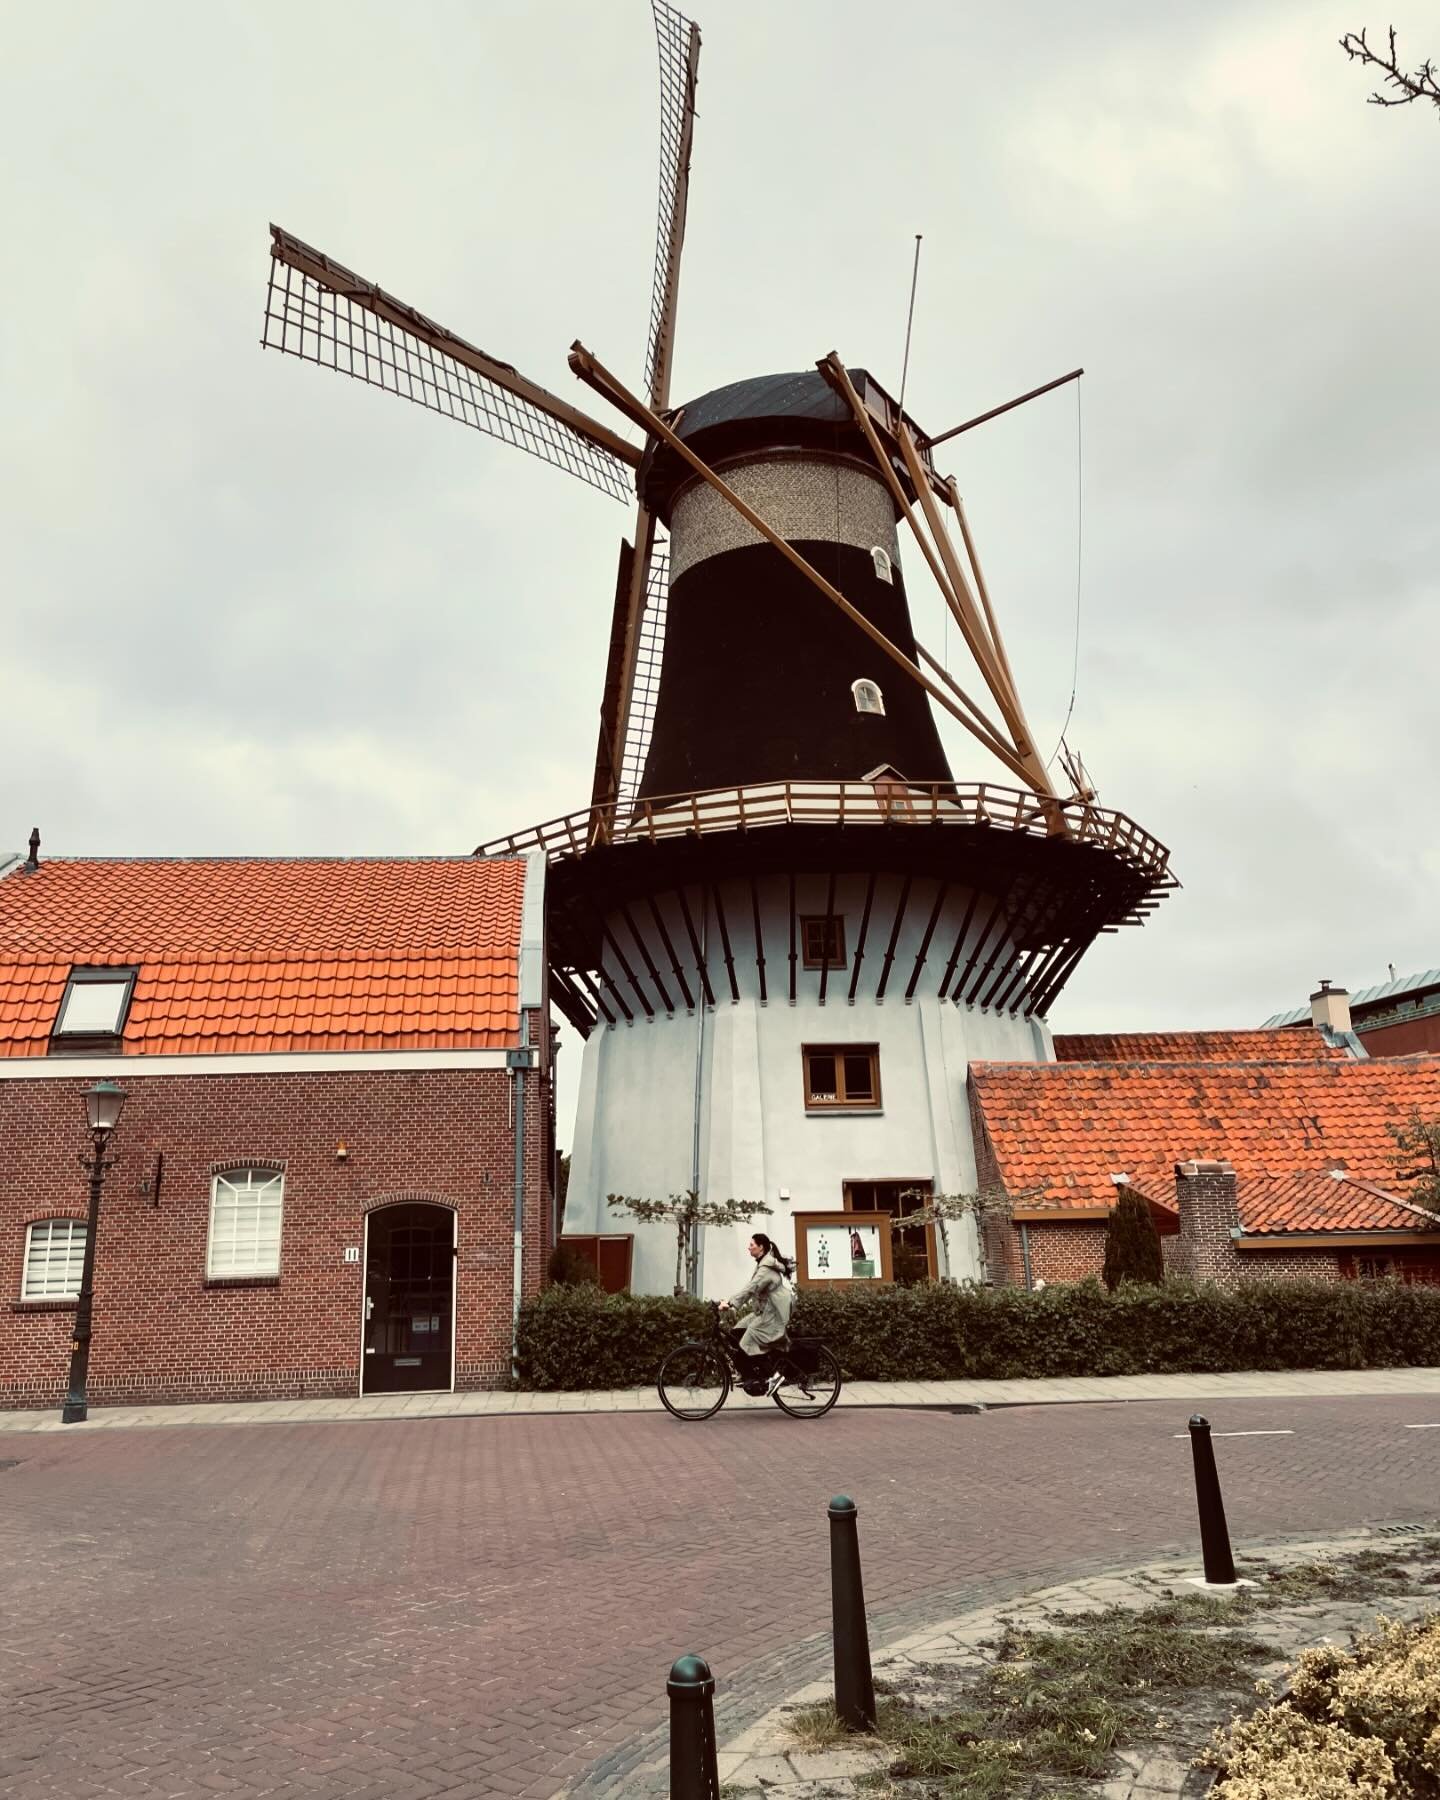 DUTCH WINDMILLS 🇳🇱🌷- There are so many different varieties of windmill in The Netherlands!

One of their most important functions was to keep the water out of the polders ( some traditional windmills are still being used for this today) but there 